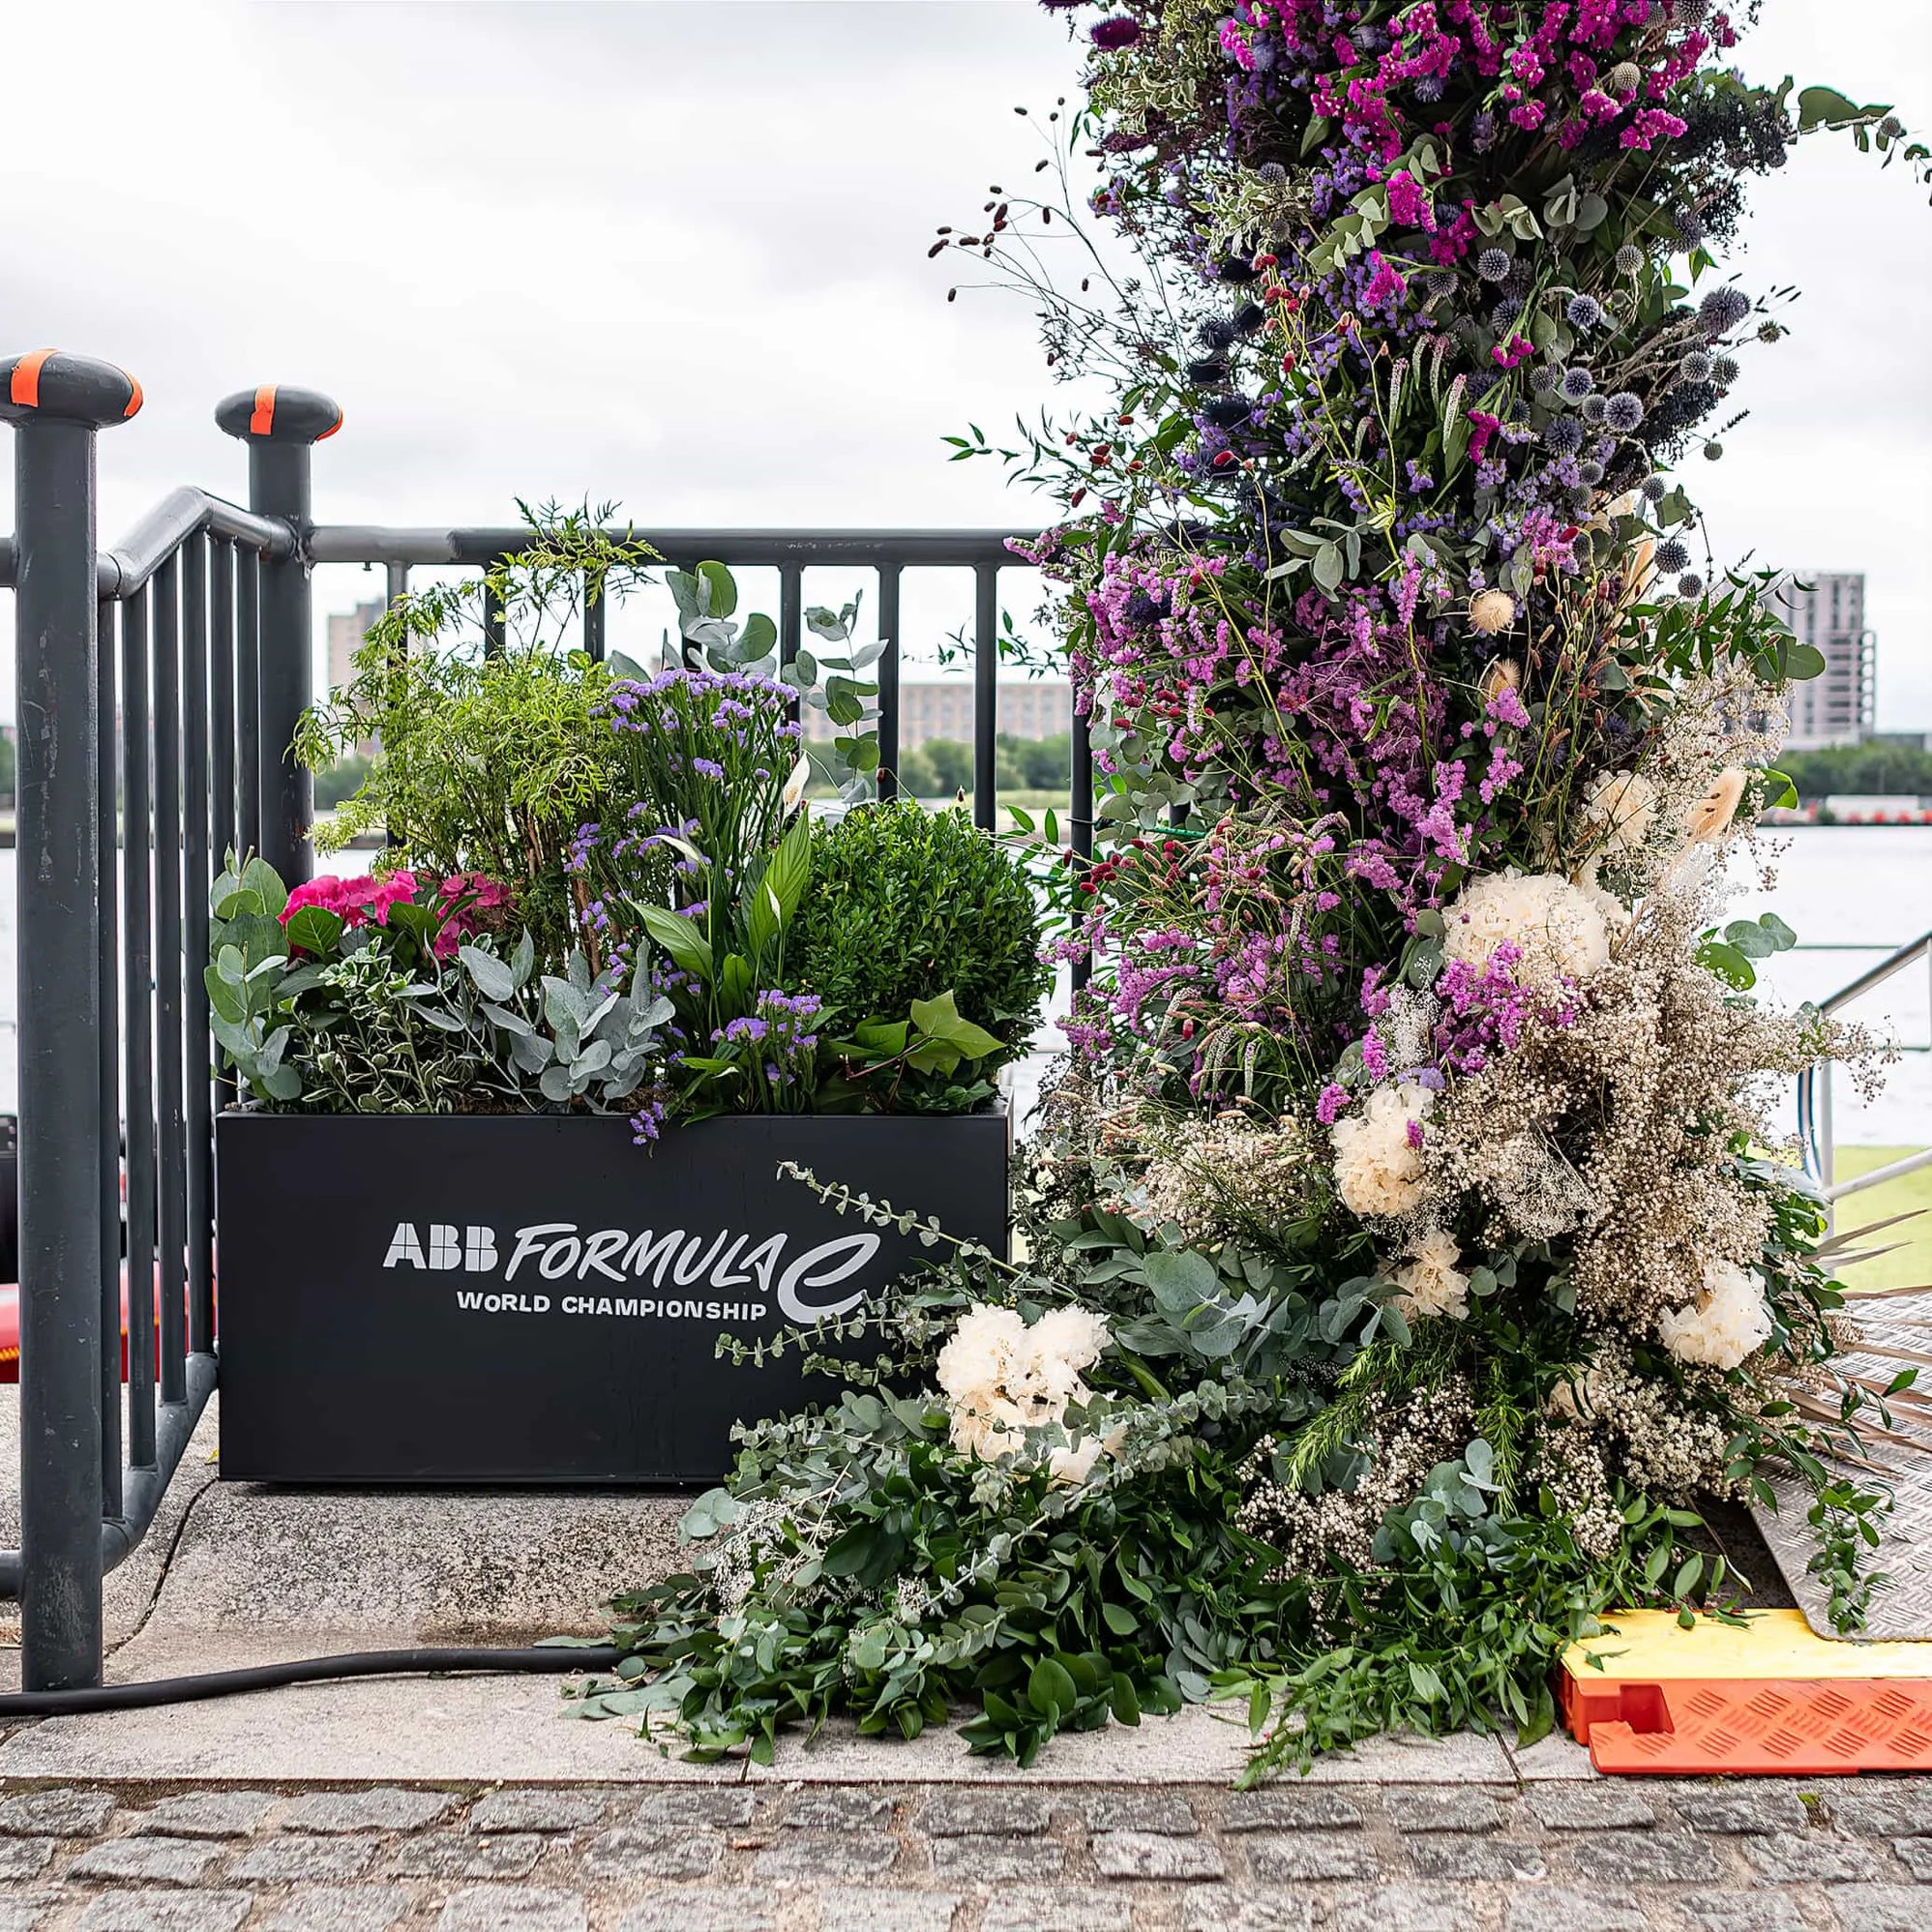 A luxurious and vibrant floral display featuring a mix of purple, pink, and white flowers elegantly adorns the event entrance at the ABB Formula E World Championship in London — Event Floristry by Amaranté London.